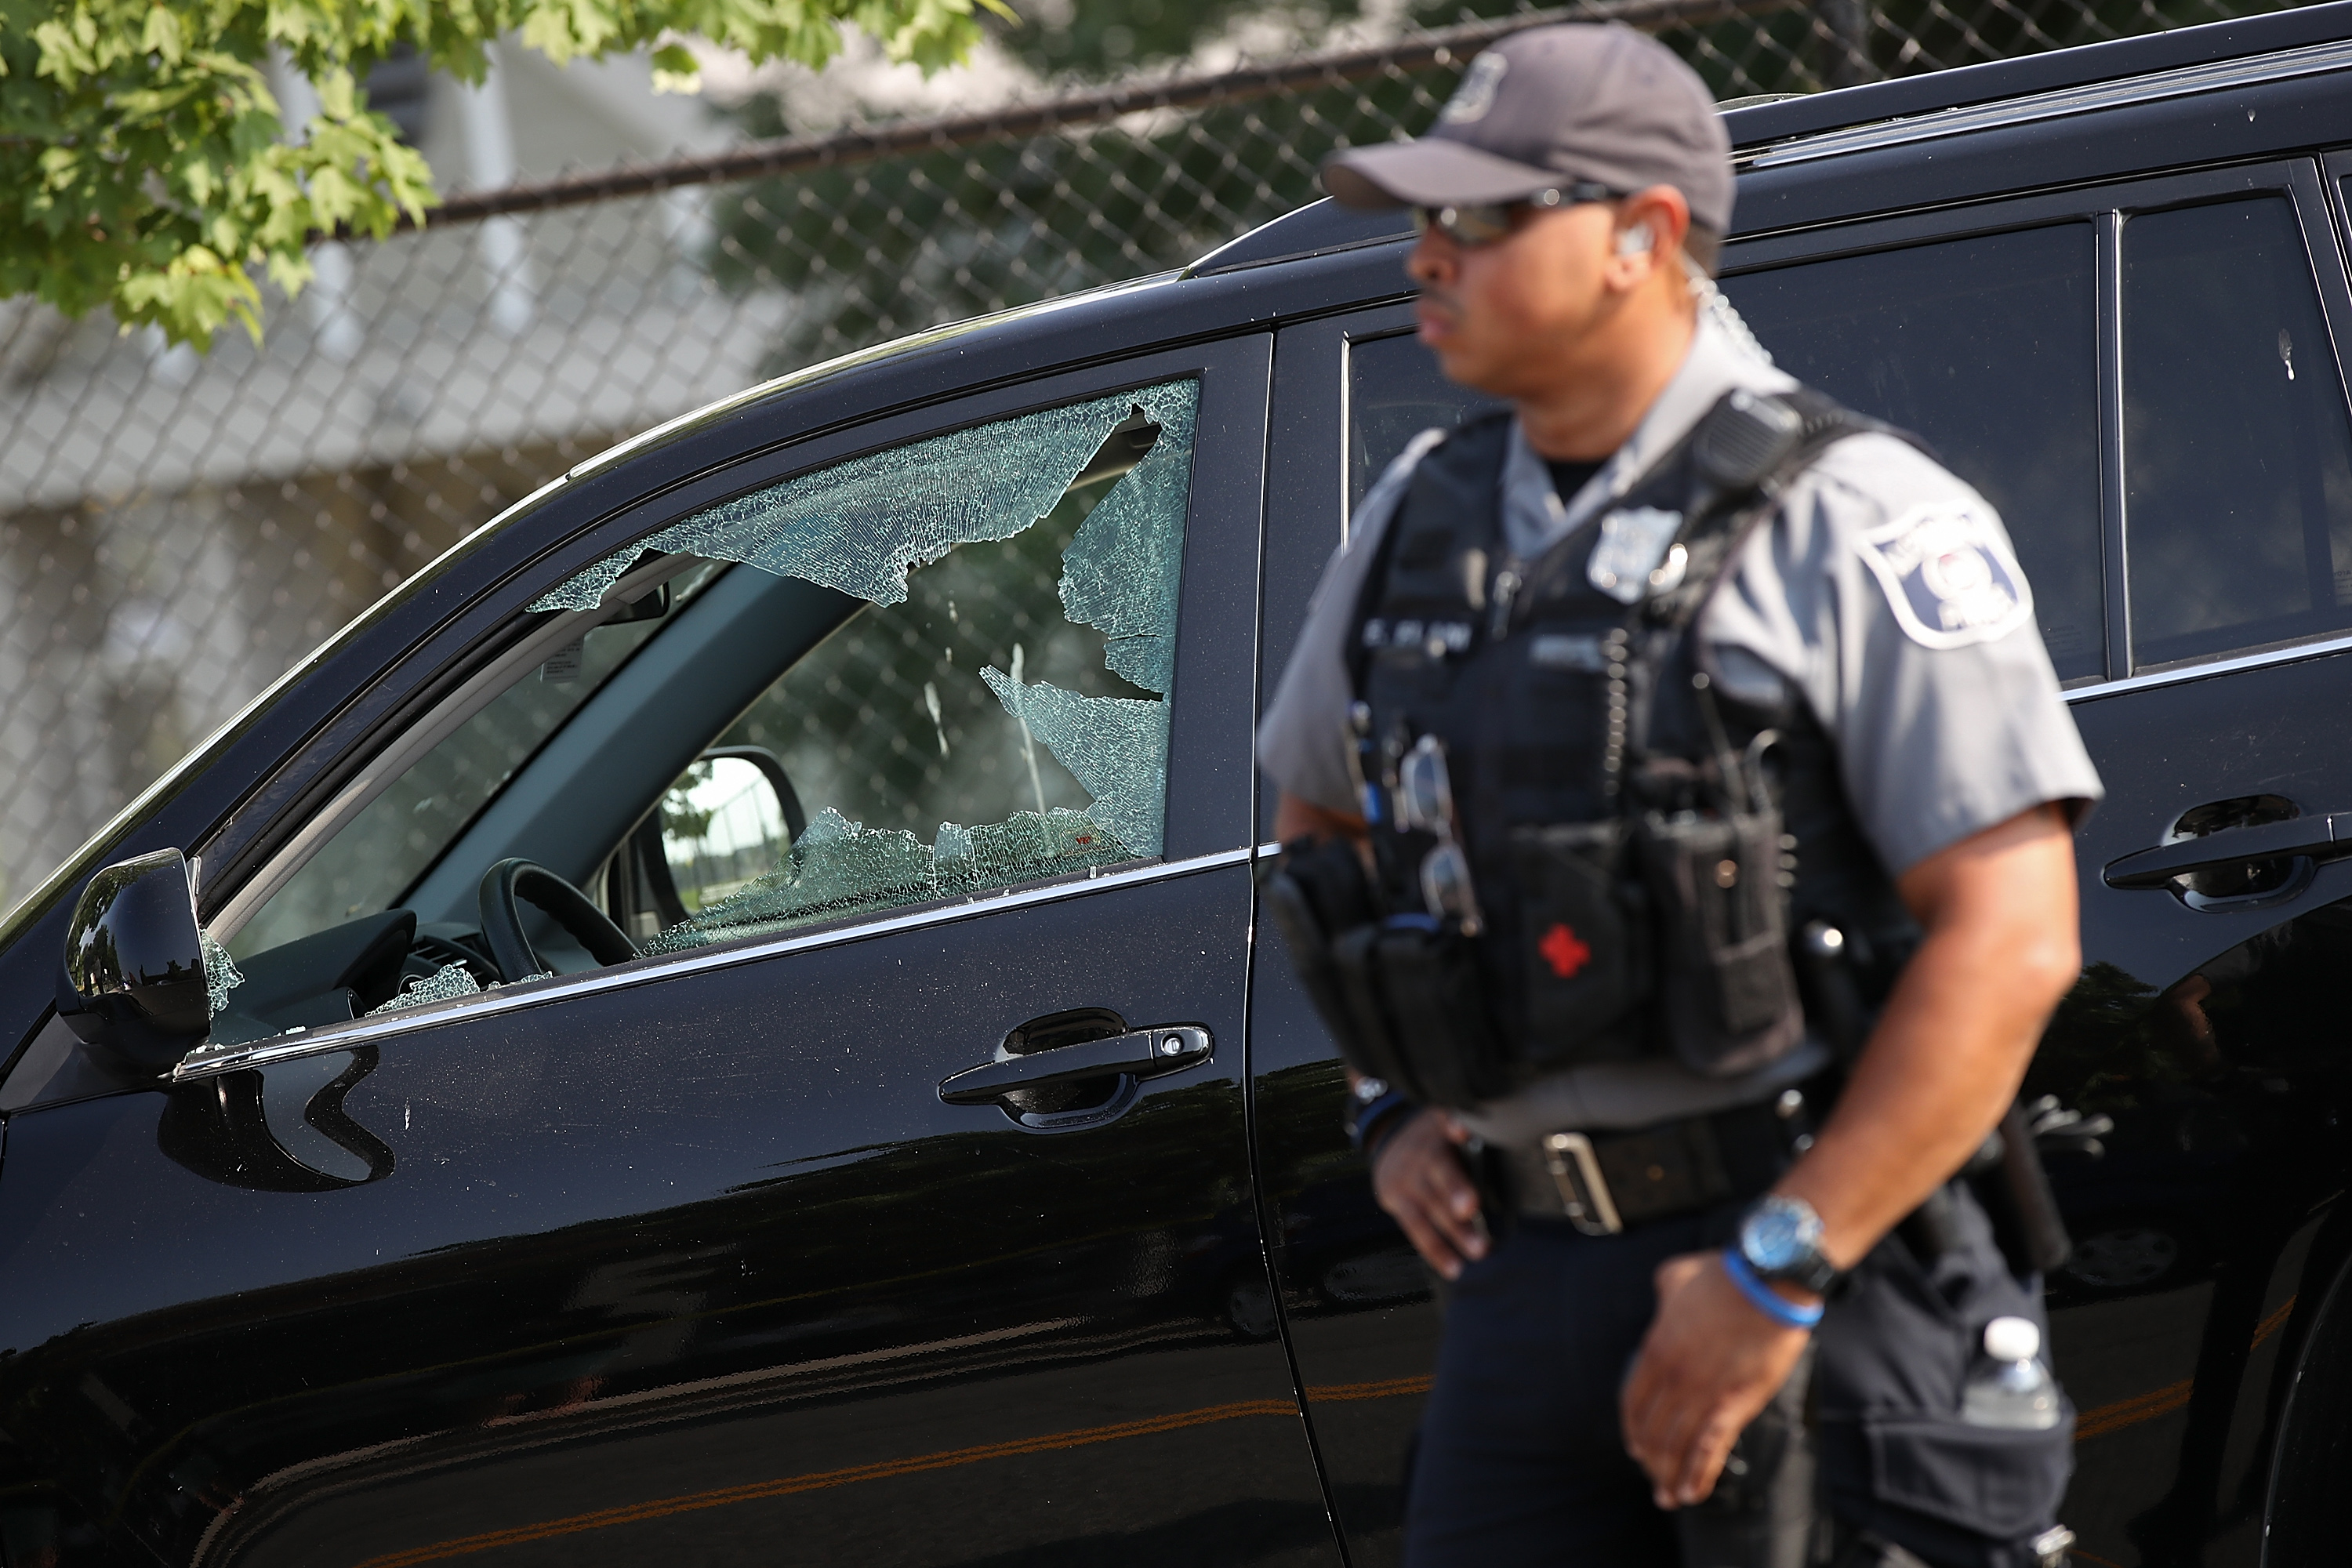 The shattered window of a vehicle hit by a bullet.